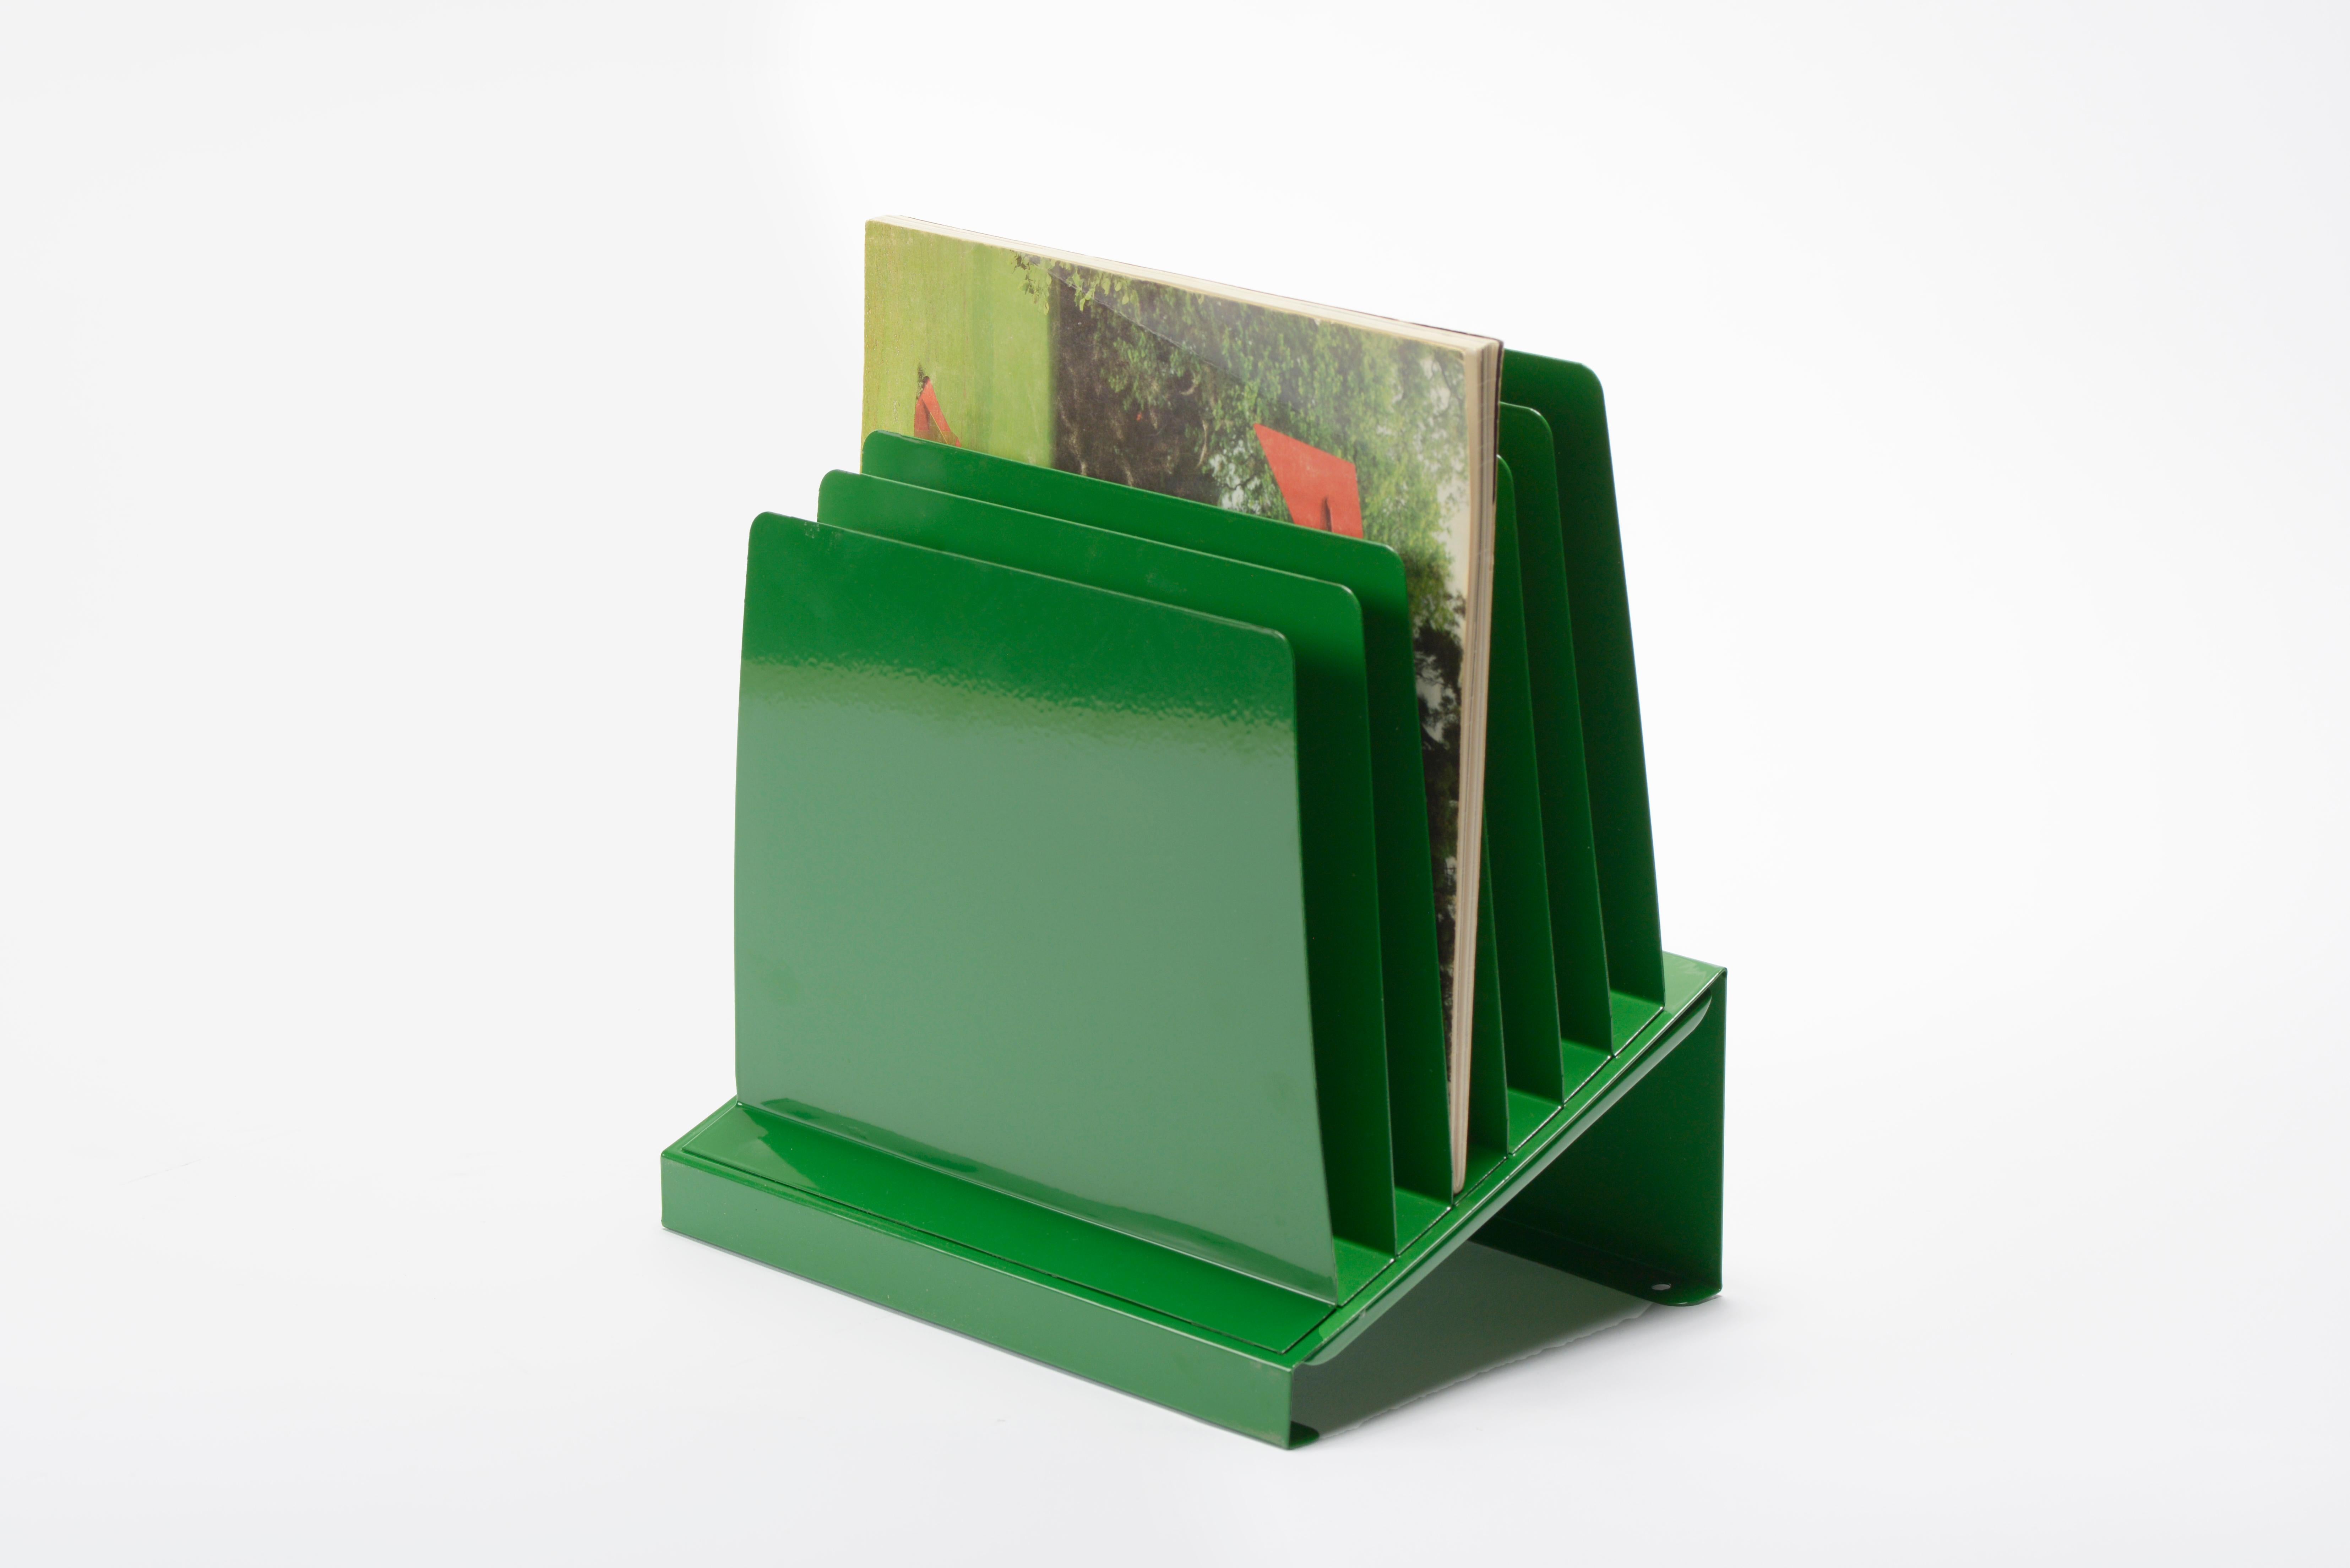 Mid-Century Modern Space Age Desktop File Holder, Refinished in Kelly Green